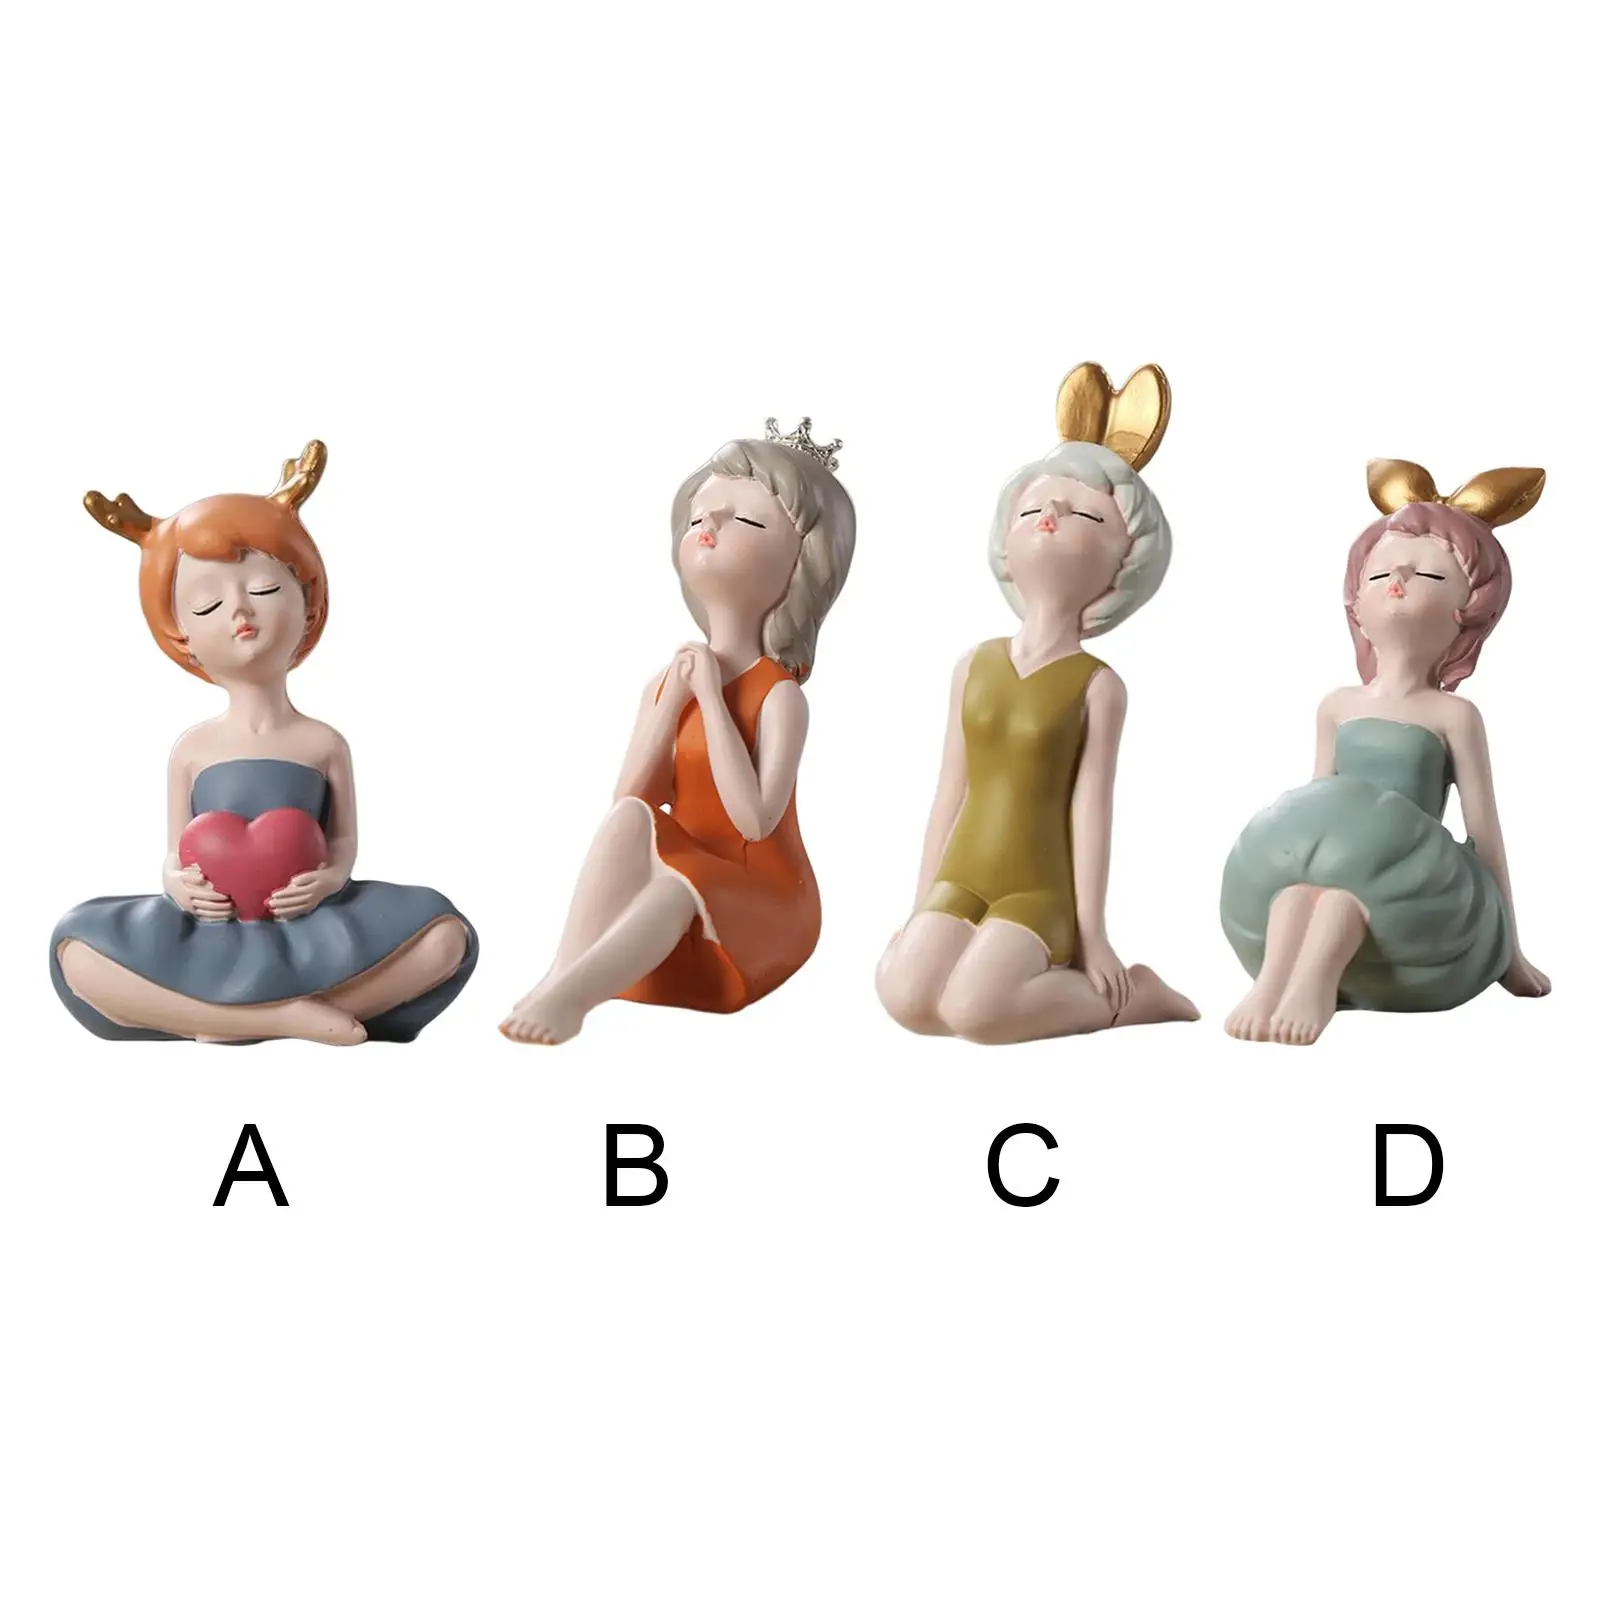 Creative Girl Figurine Statue Art Cute Sculpture Resin Collectible for Table Wedding Party Decoration Ornaments